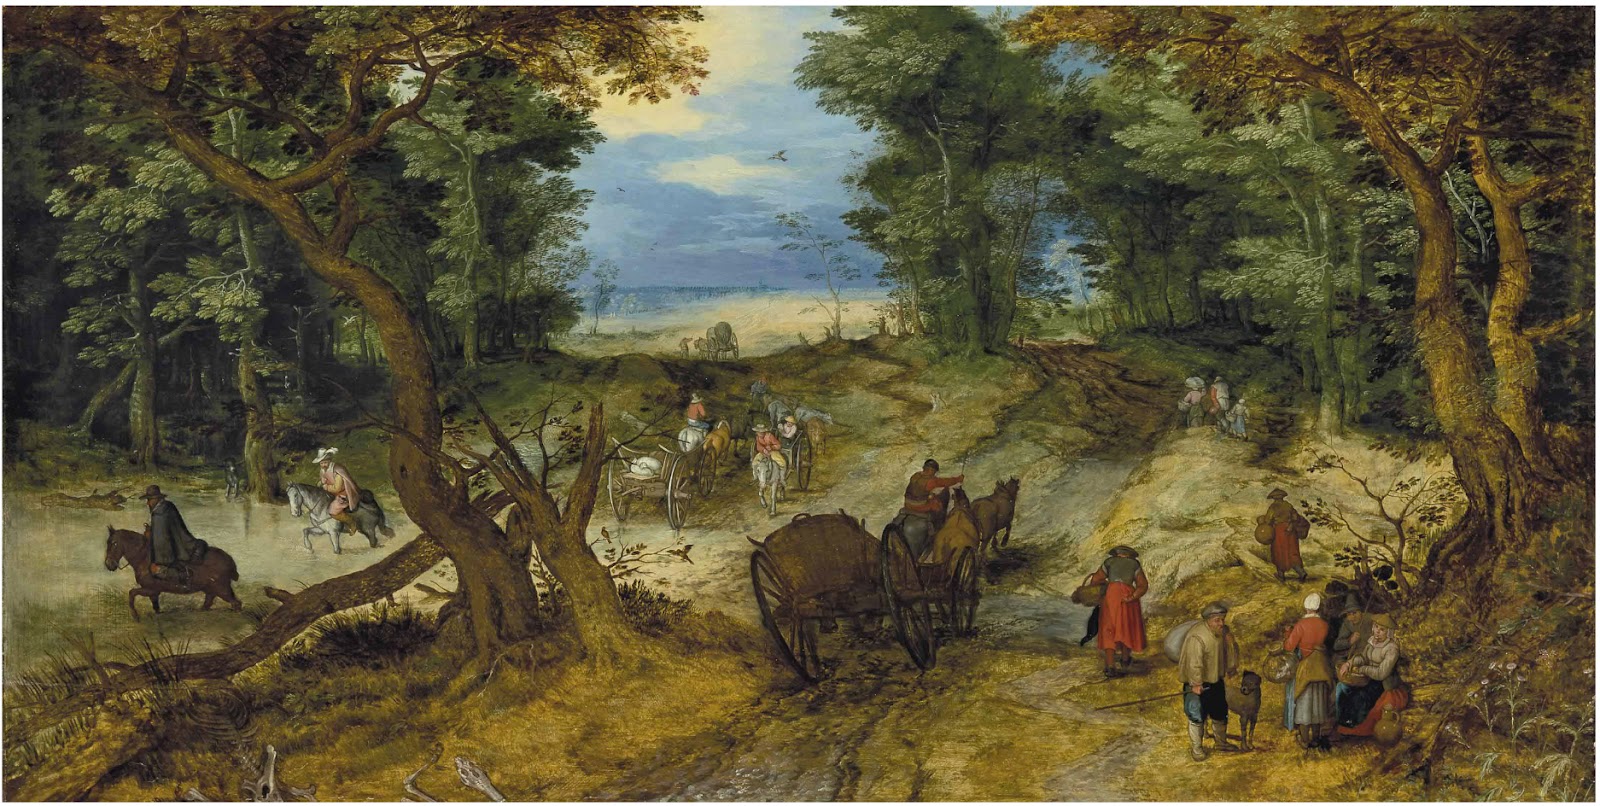 Jan_Brueghel_I_-_A_wooded_landscape_with_travelers_on_a_path.jpg